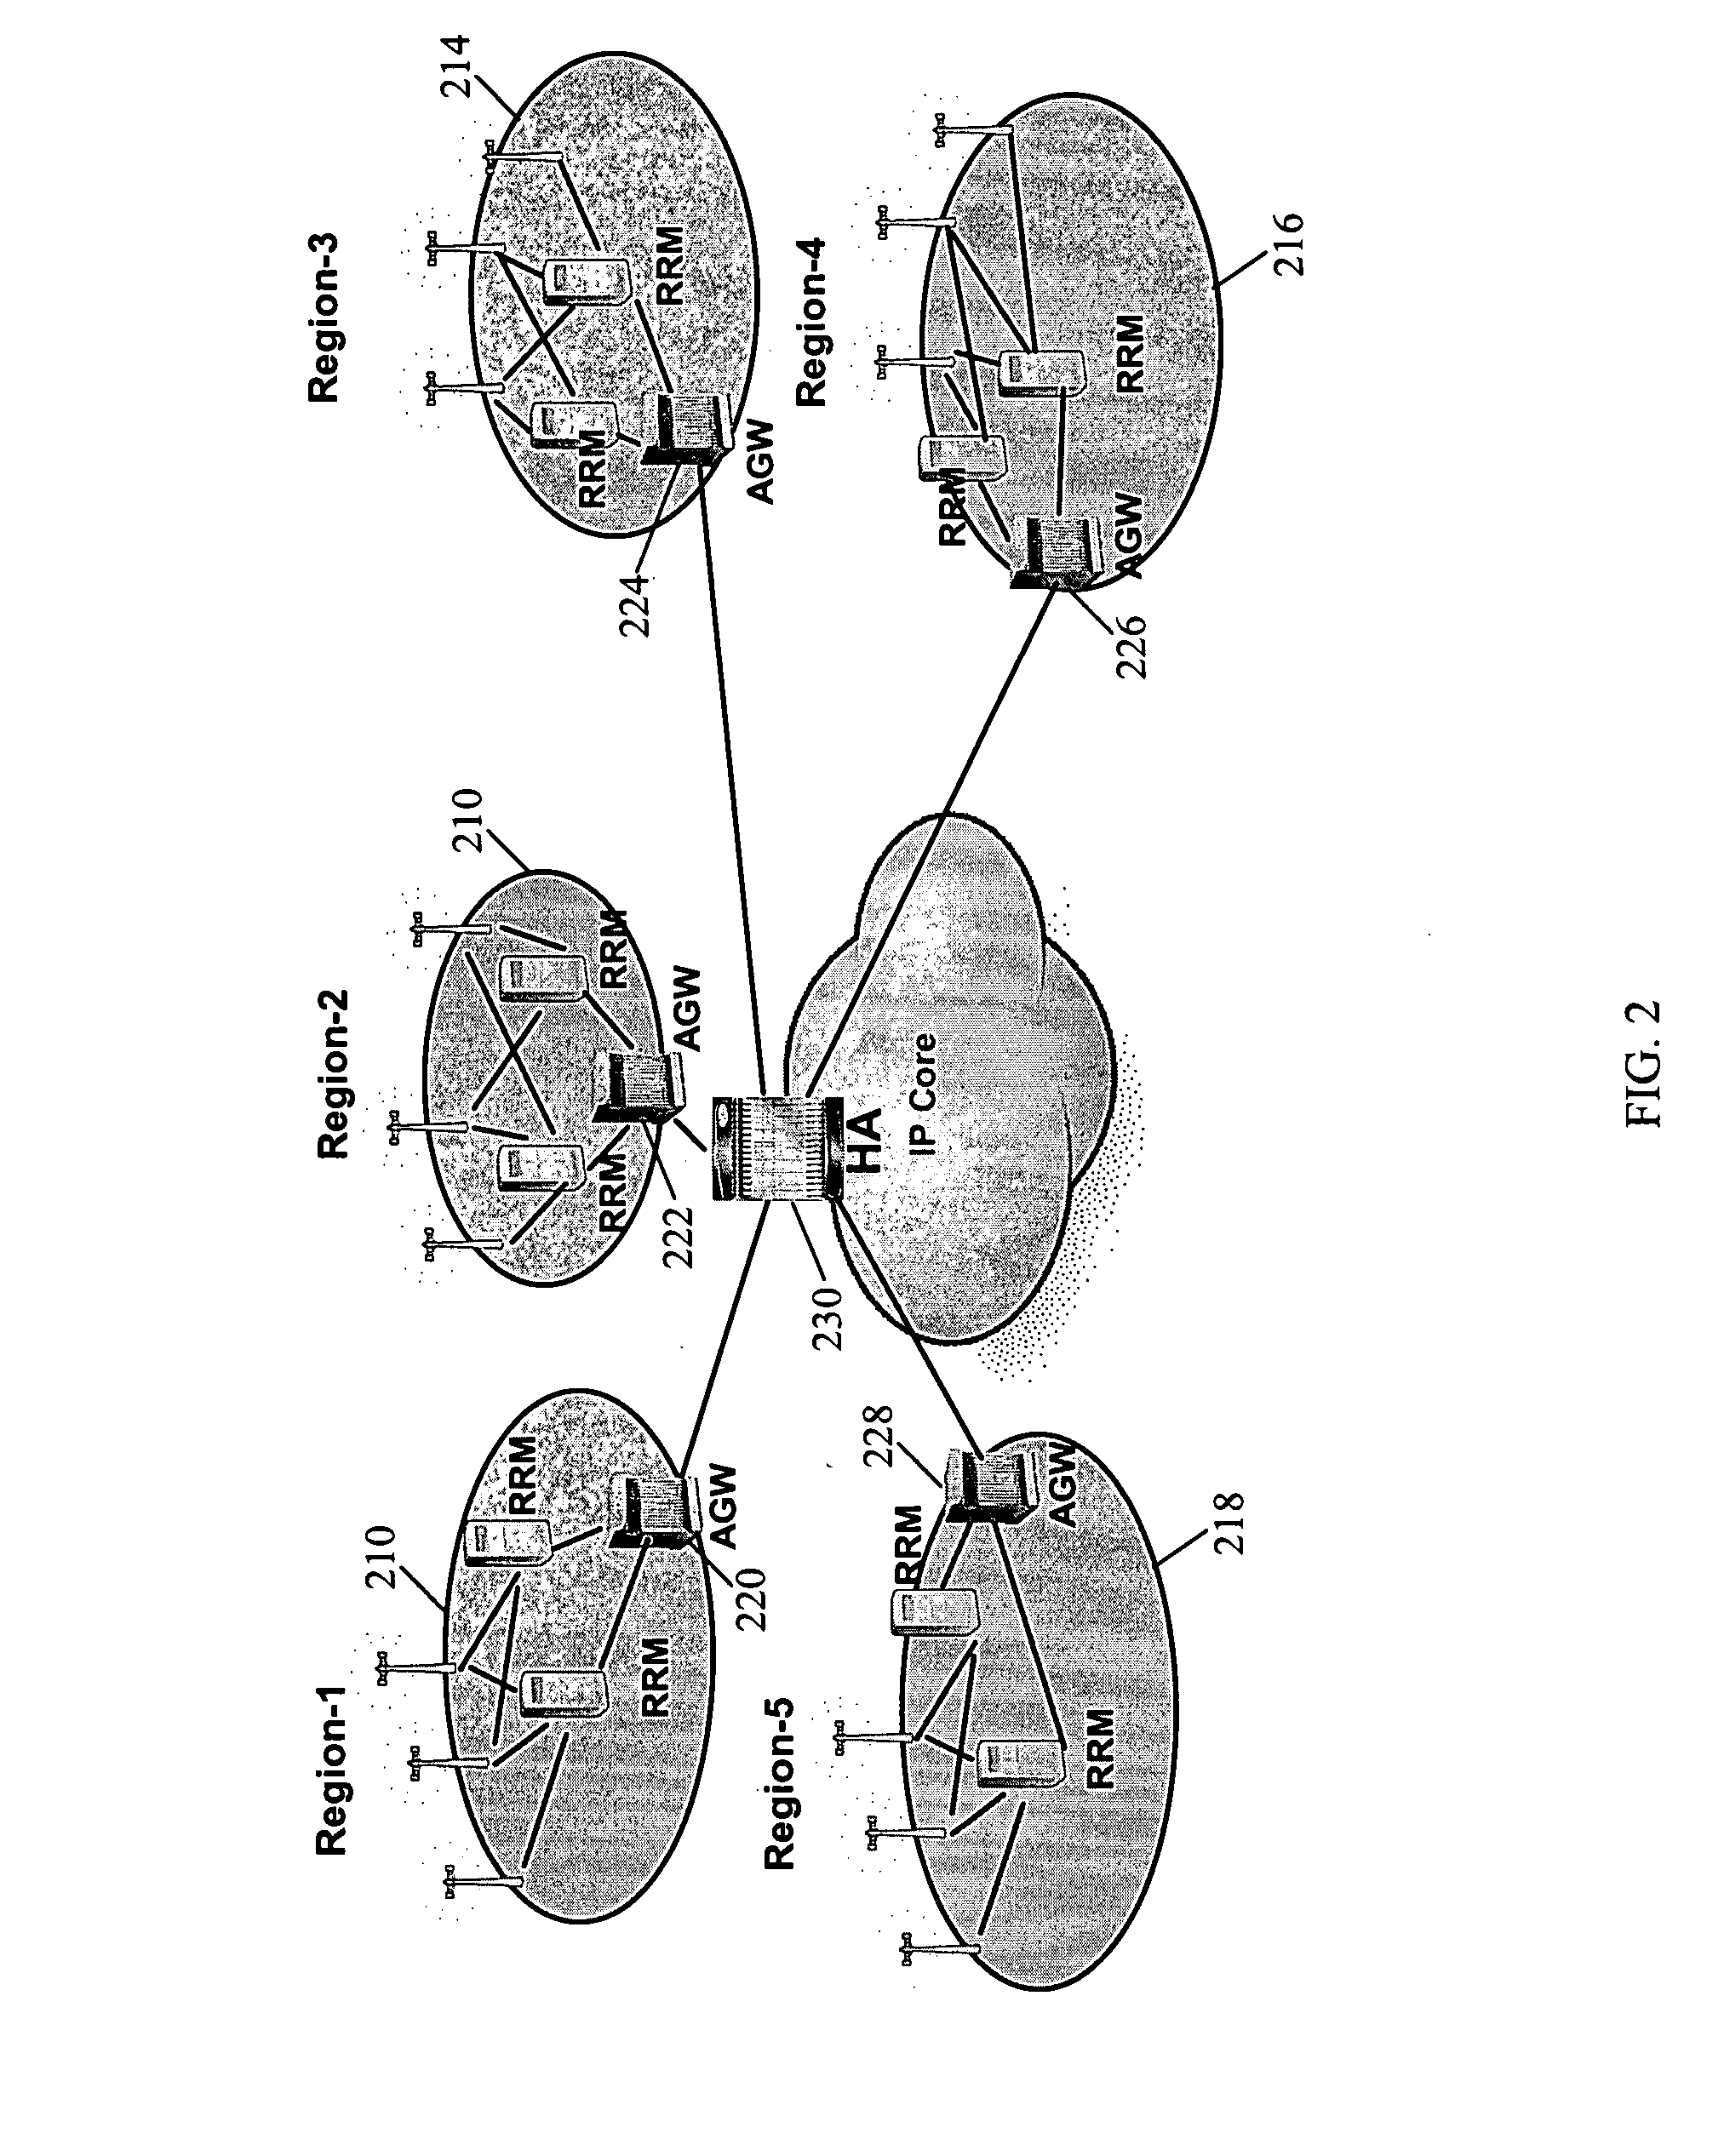 System and method for traffic localization